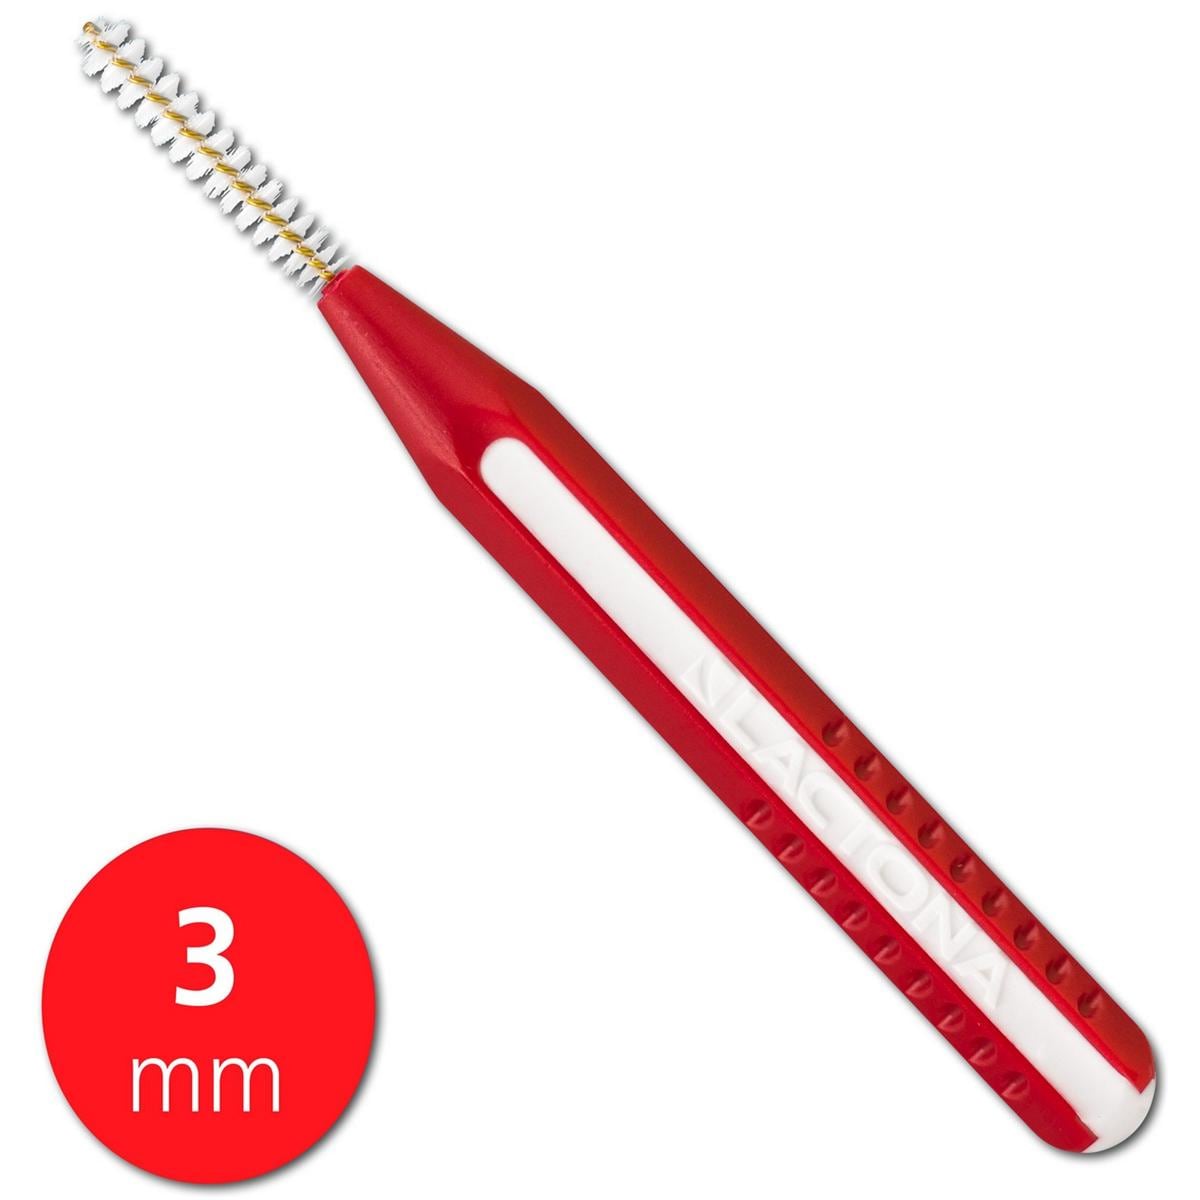 EasyGrip - Recharge - 3 mm rouge 100 pcs